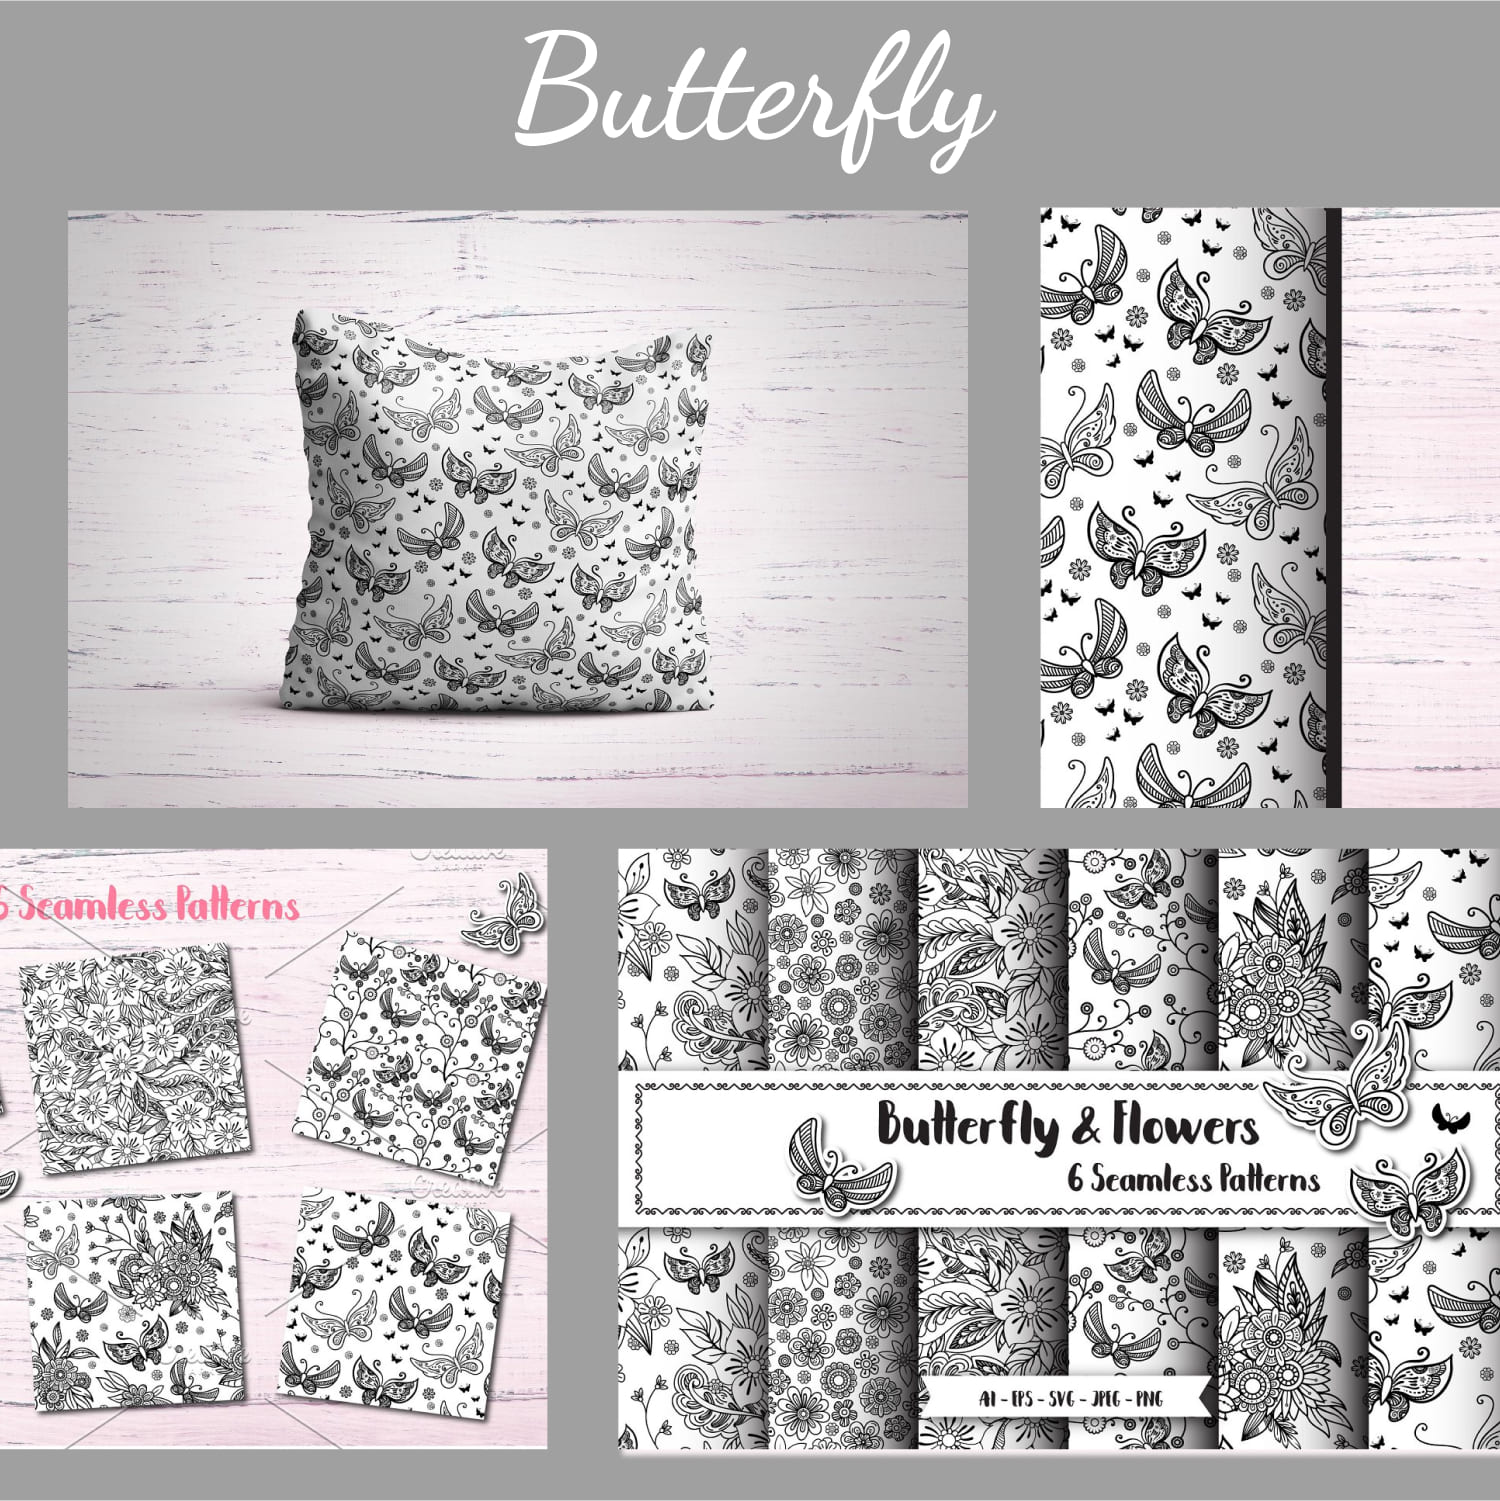 Save Butterfly Seamless Patterns cover.